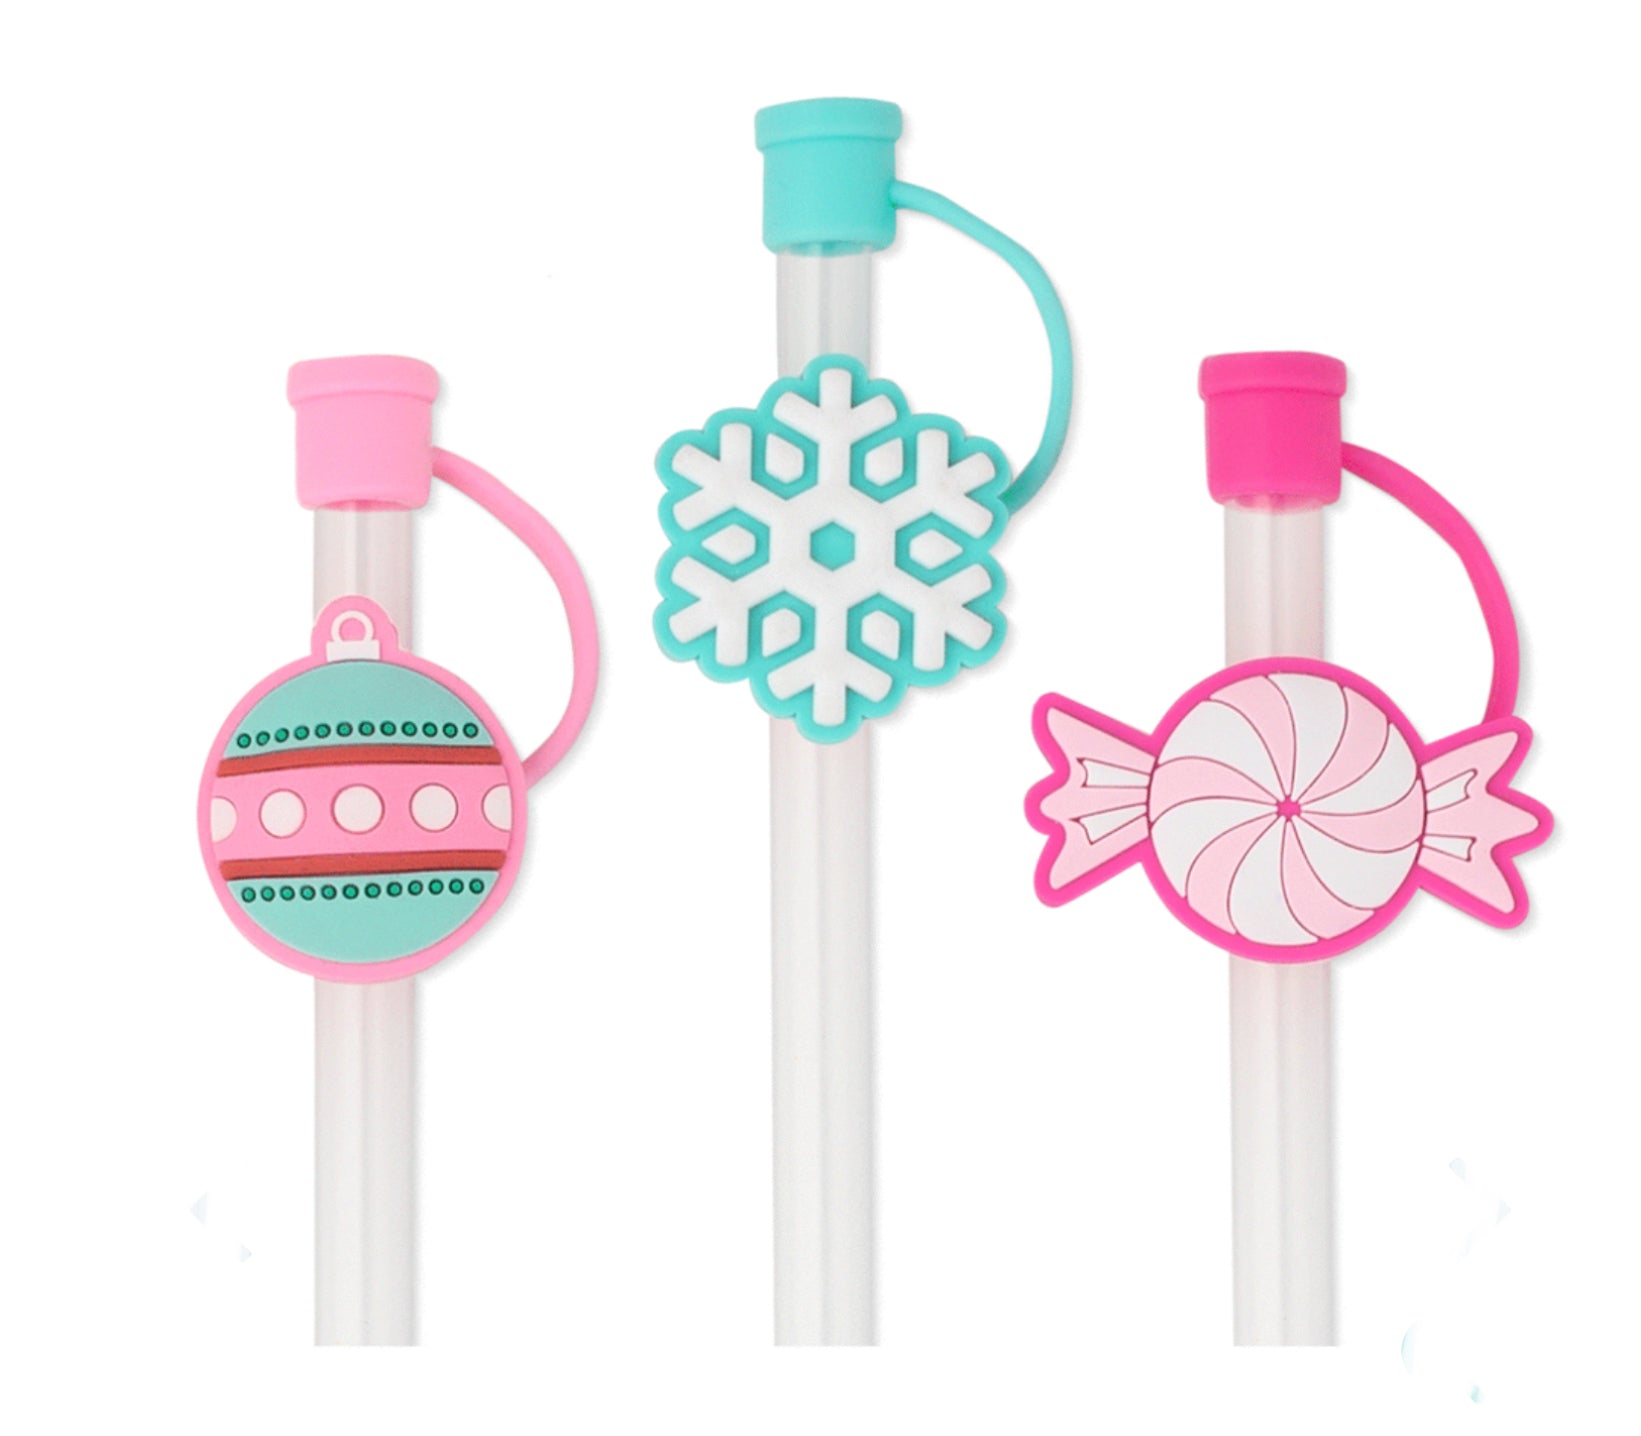 Swig Holiday Straw Topper 3 pc sets